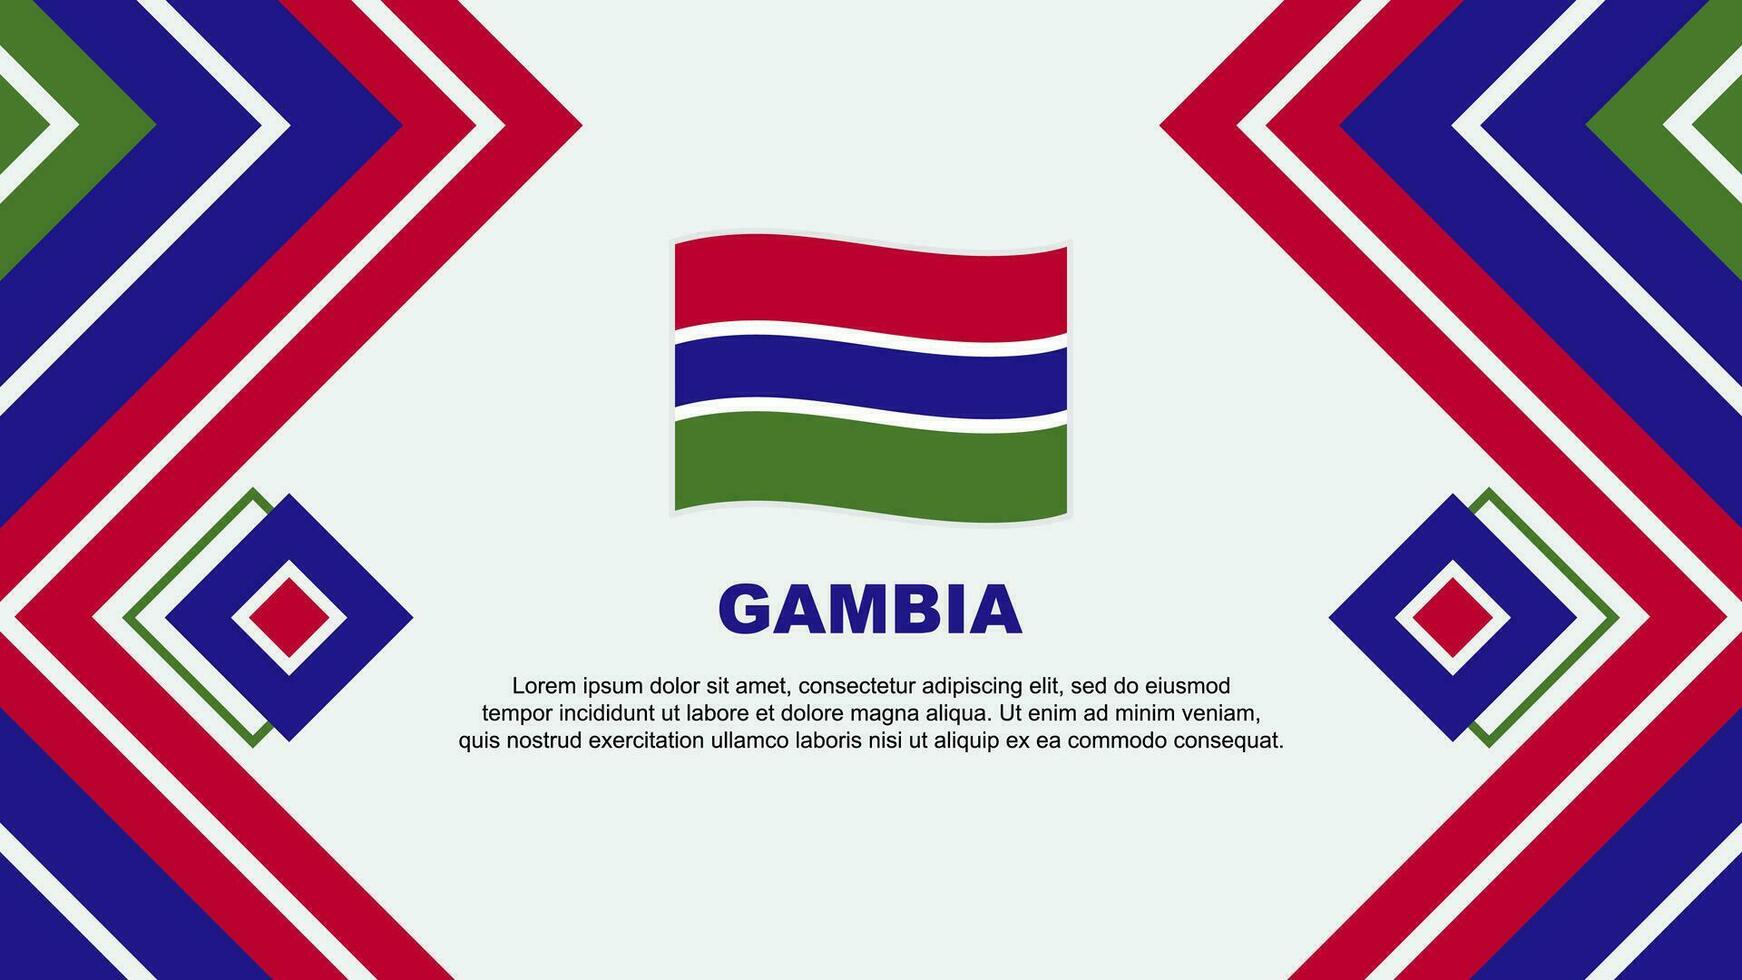 Gambia Flag Abstract Background Design Template. Gambia Independence Day Banner Wallpaper Vector Illustration. Gambia Design